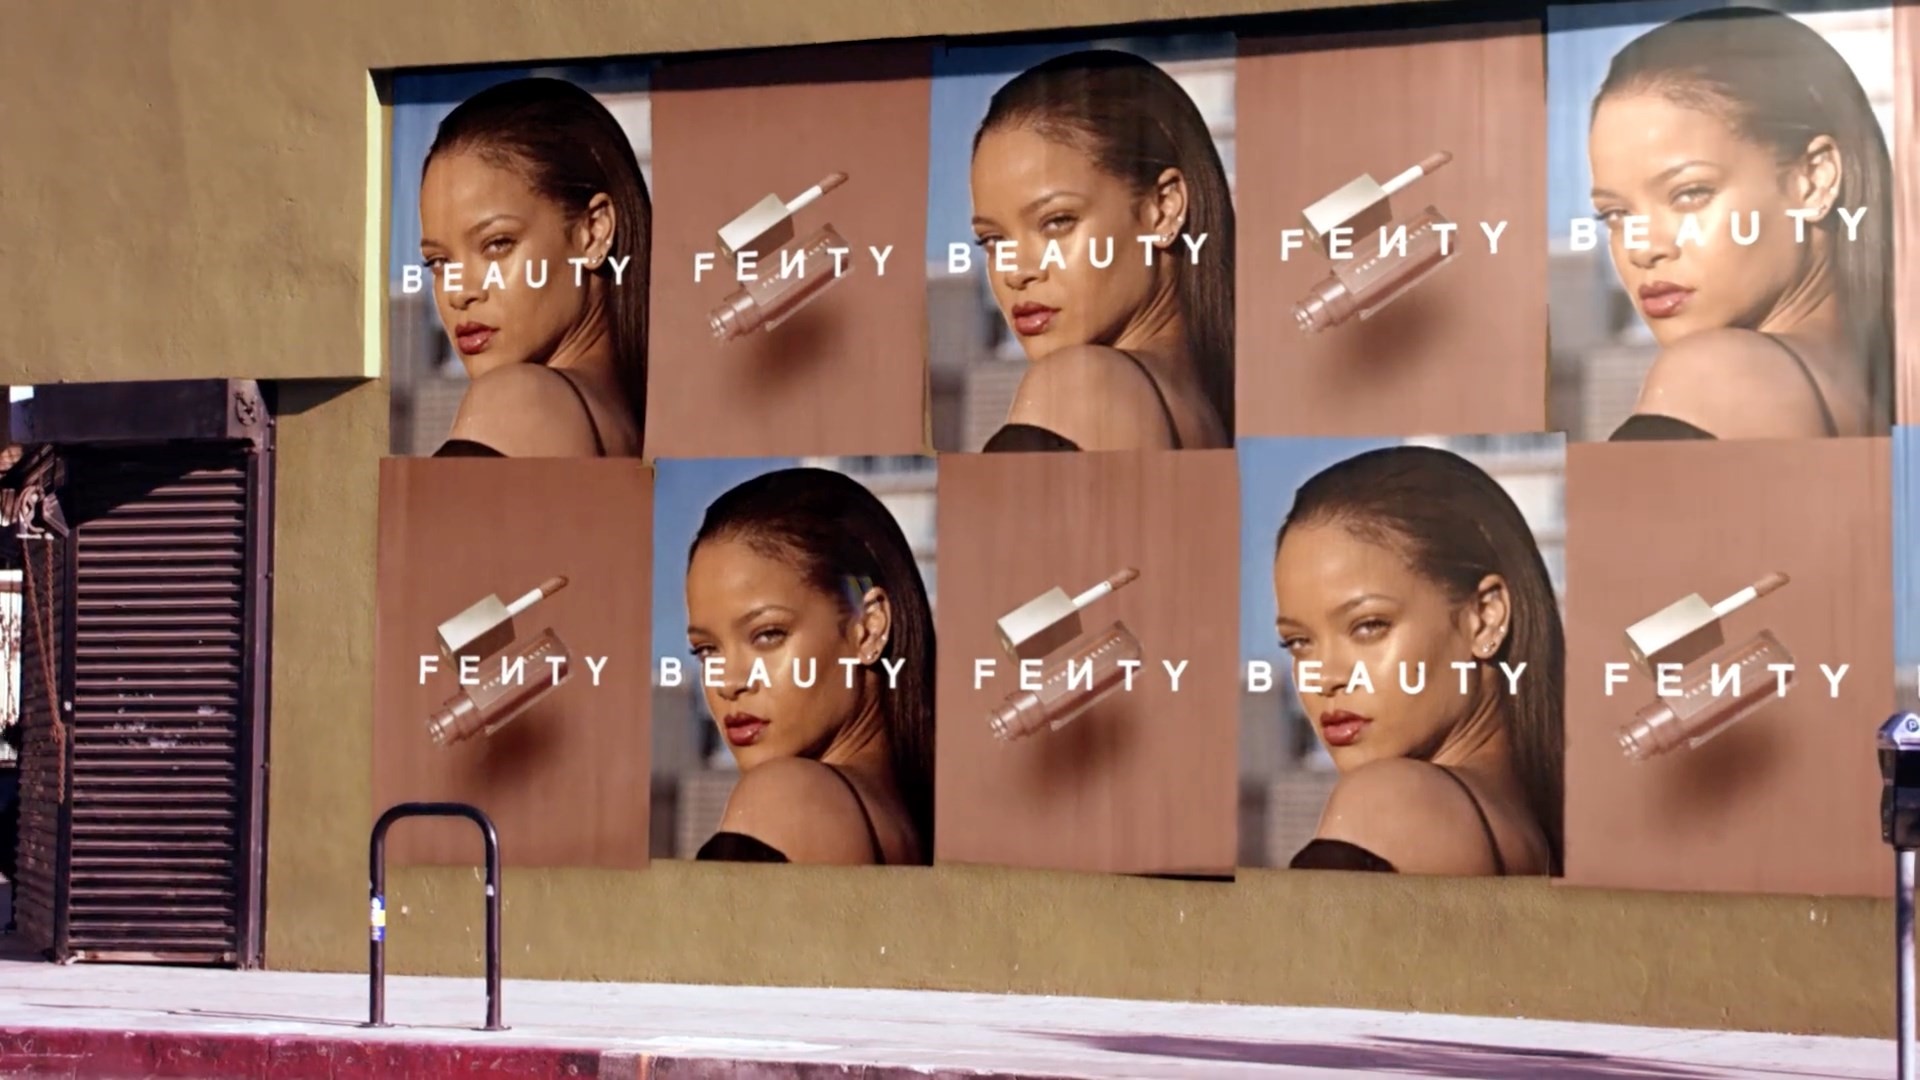 The Next Fenty Face Campaign Is Down To Four Ladies